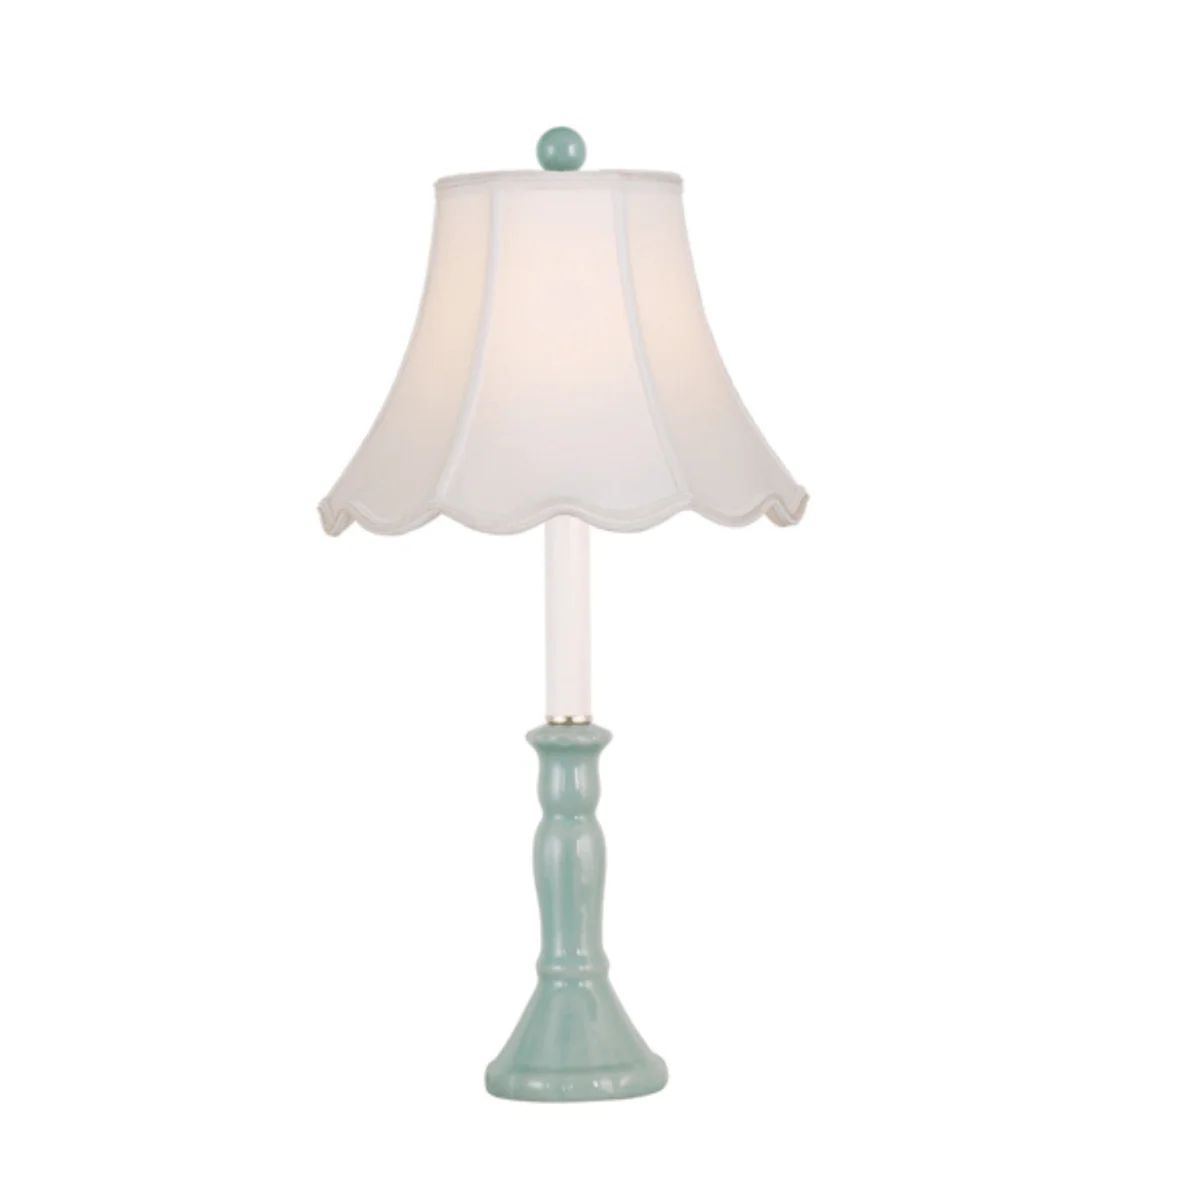 Set of Two - Celadon Porcelain Candlestick Lamps With Scalloped Shades | The Well Appointed House, LLC